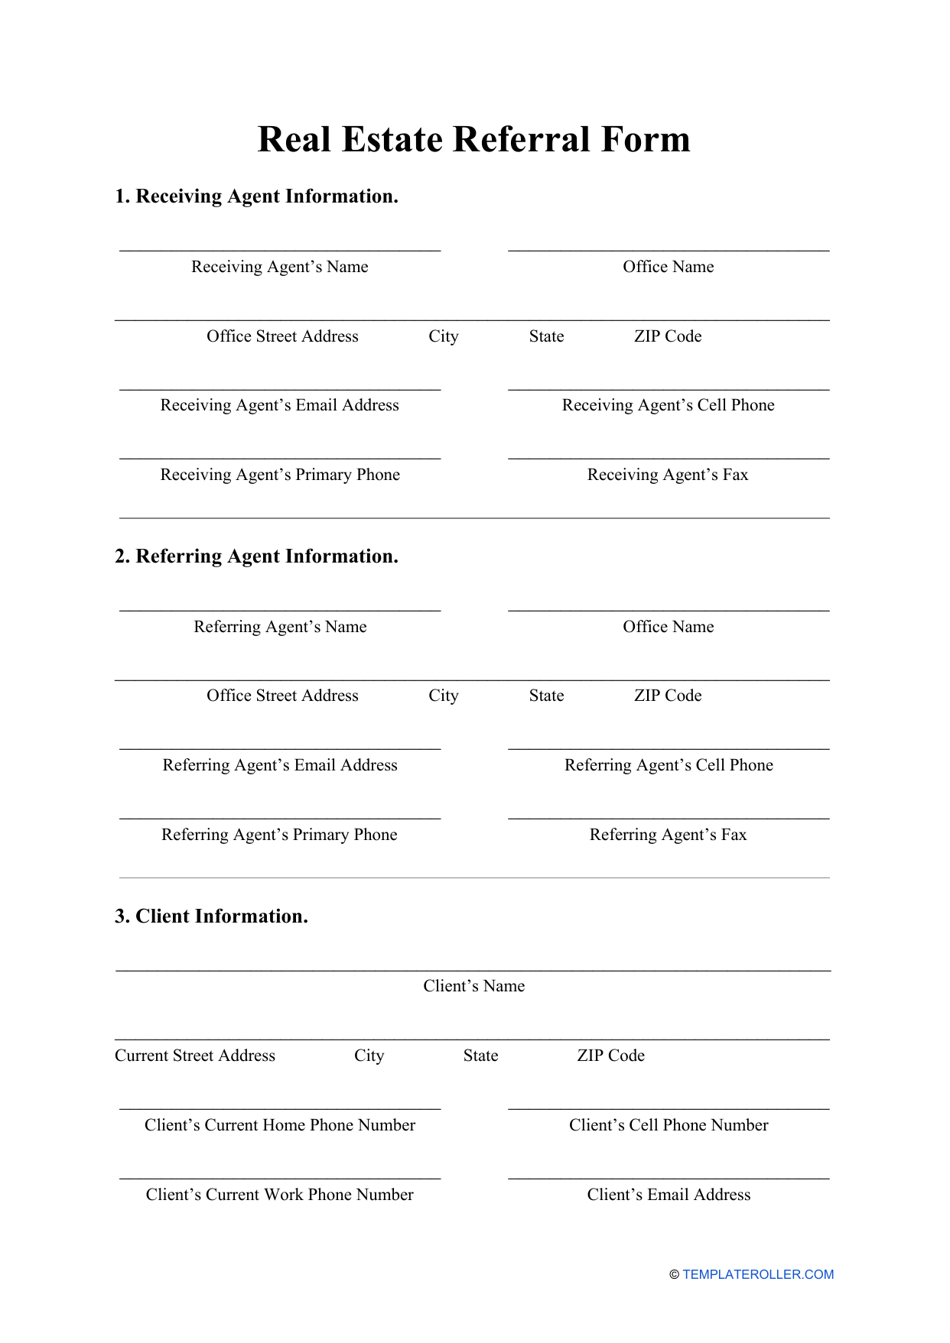 Real Estate Referral Form, Page 1